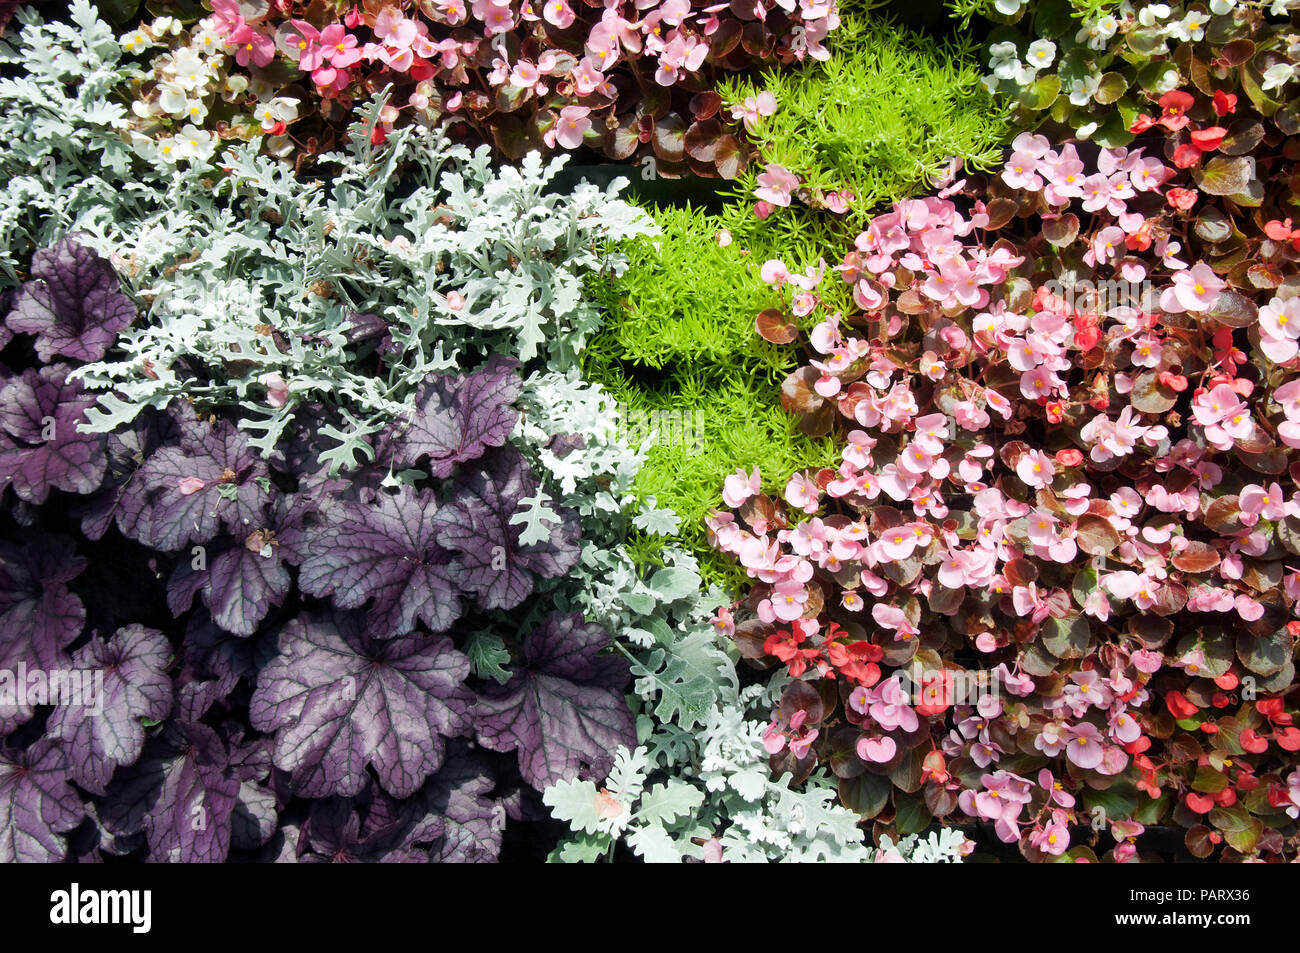 Sydney Australia, plant wall with wax begonia, dusty miller and gold mound plants Stock Photo